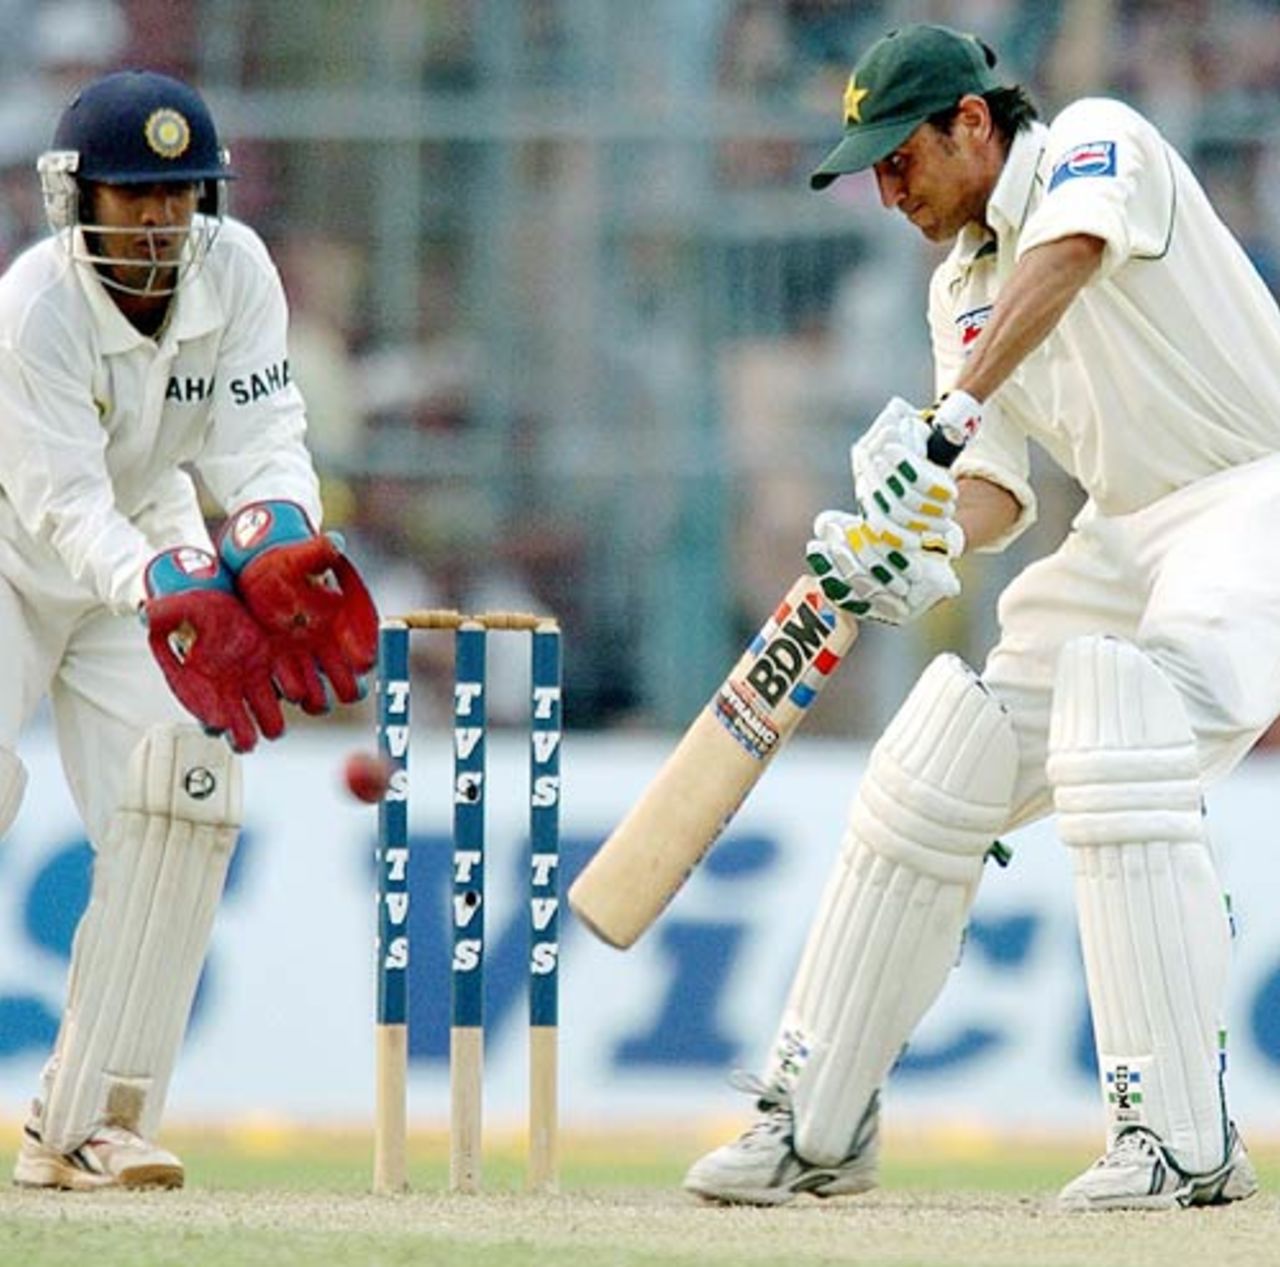 Under pressure to keep his place in the side, Younis Khan played positively from the start, driving on the up and making room to cut the spinners, India v Pakistan, 2nd Test, Kolkata, March 17, 2005